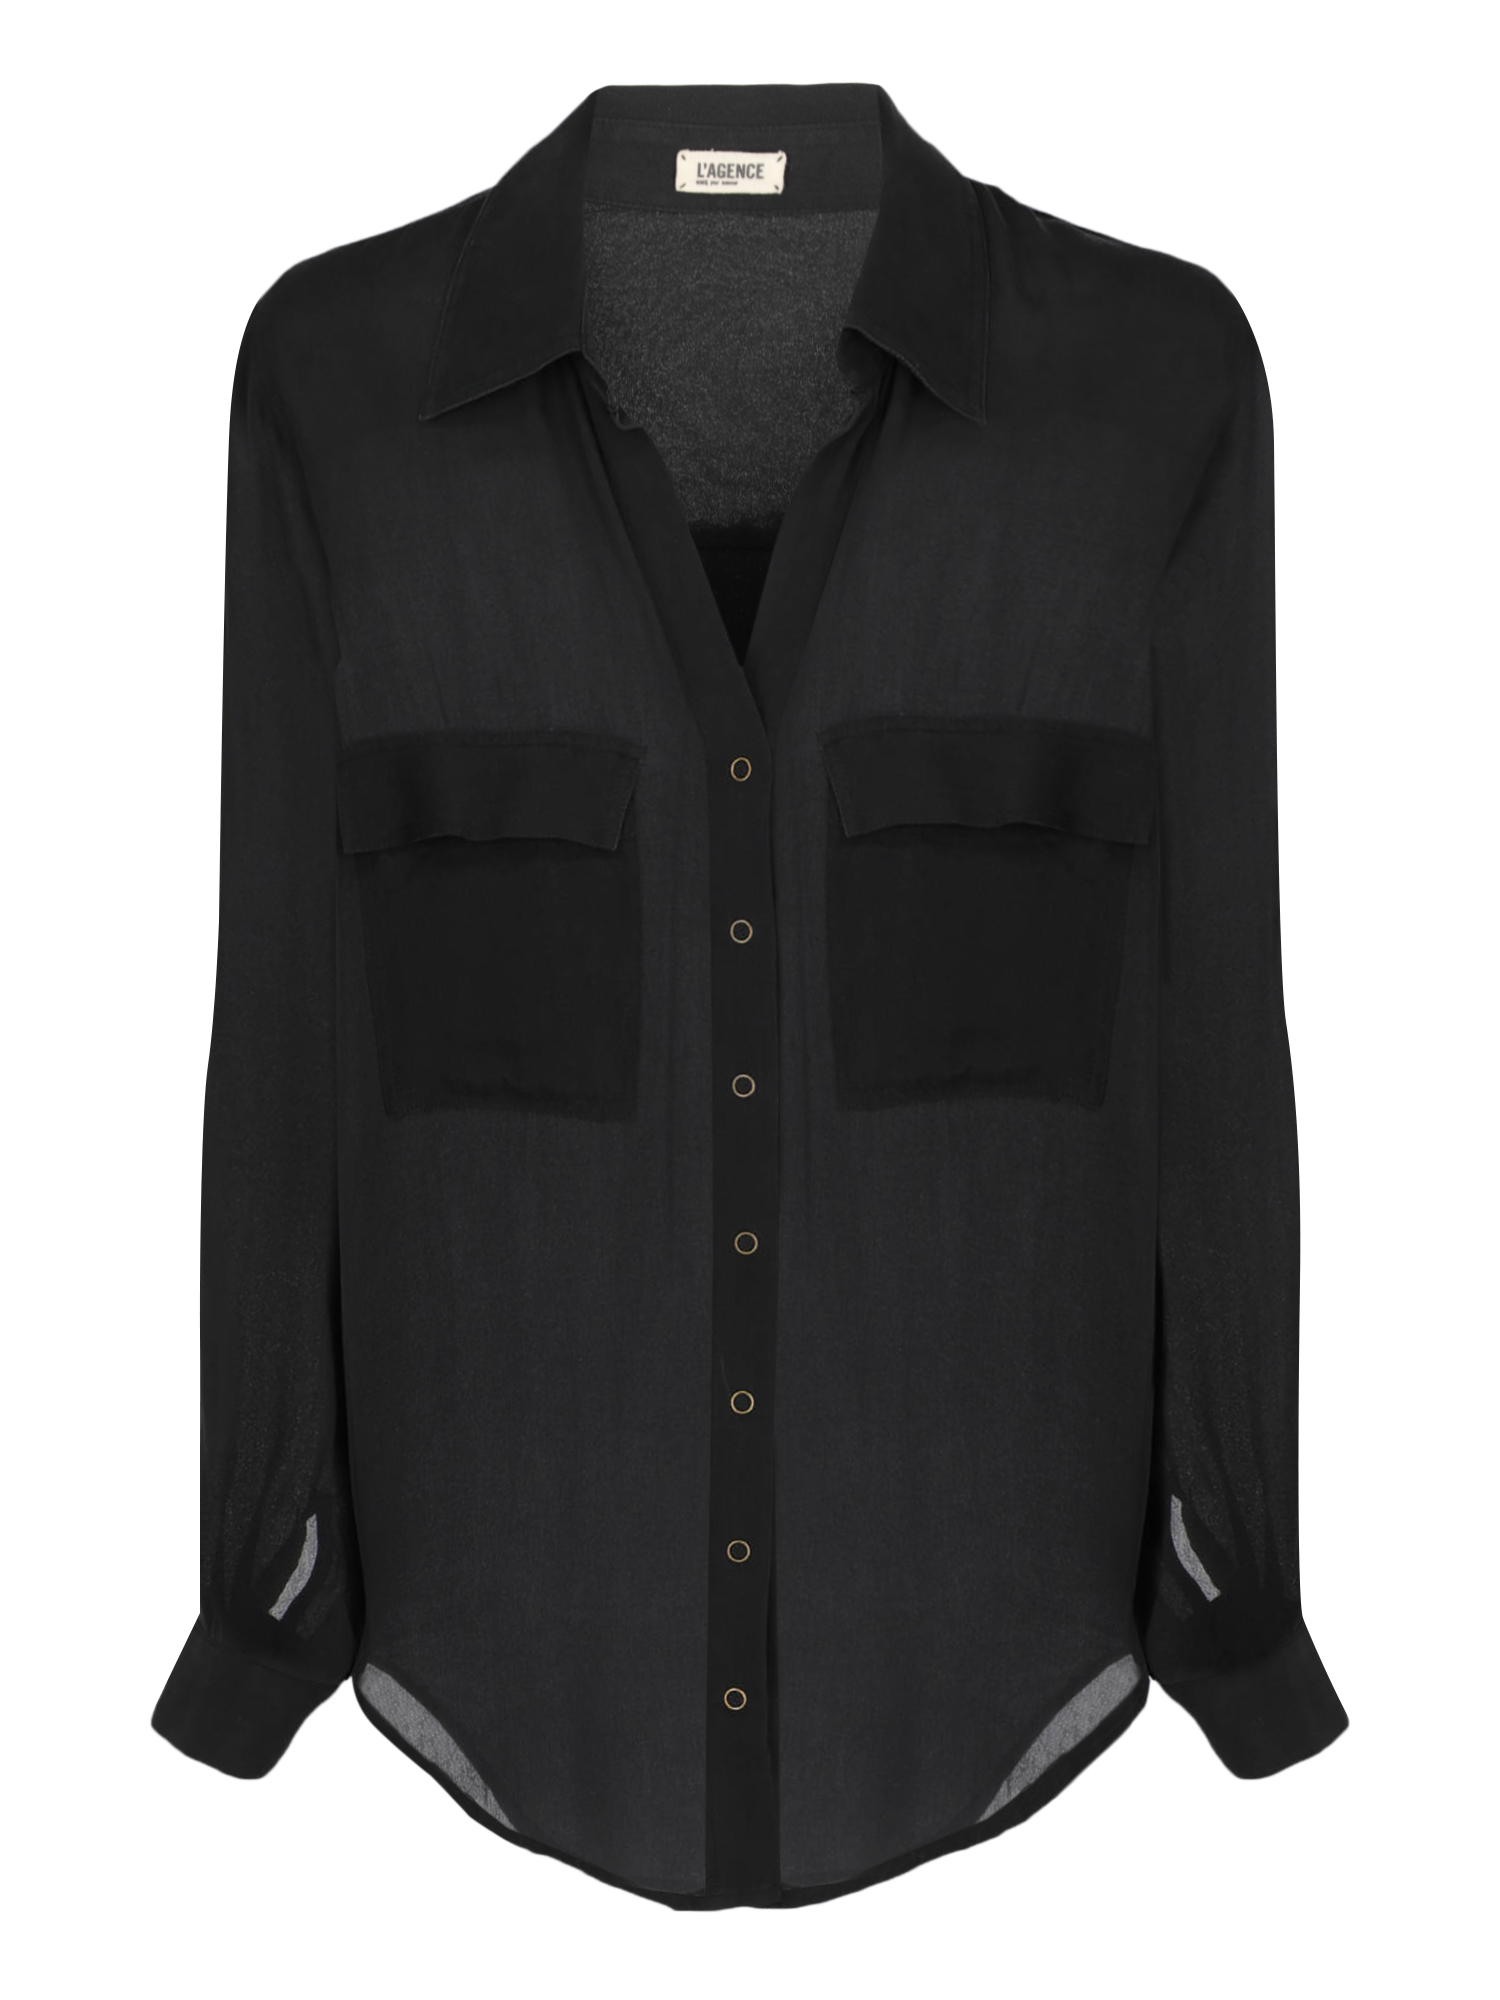 Pre-owned L Agence Women's Shirts - L'agence - In Black Xs